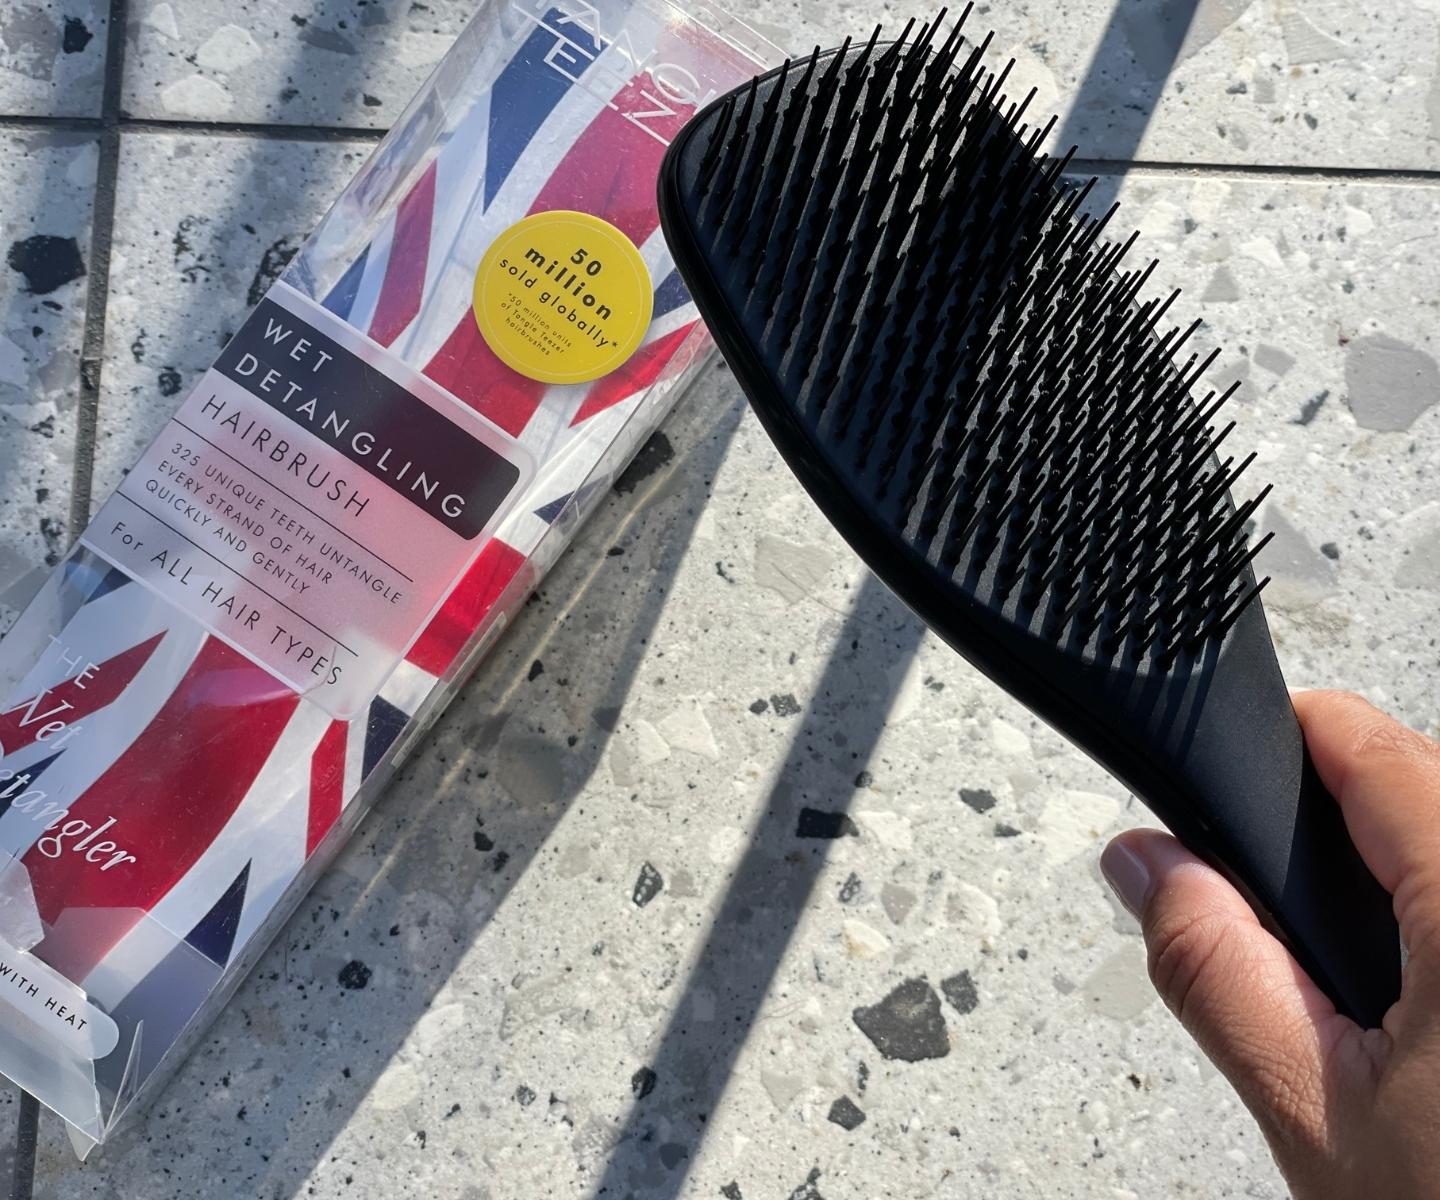 I Tried the Bargain Tangle Teezer Hairbrush That's Sold 50 Million